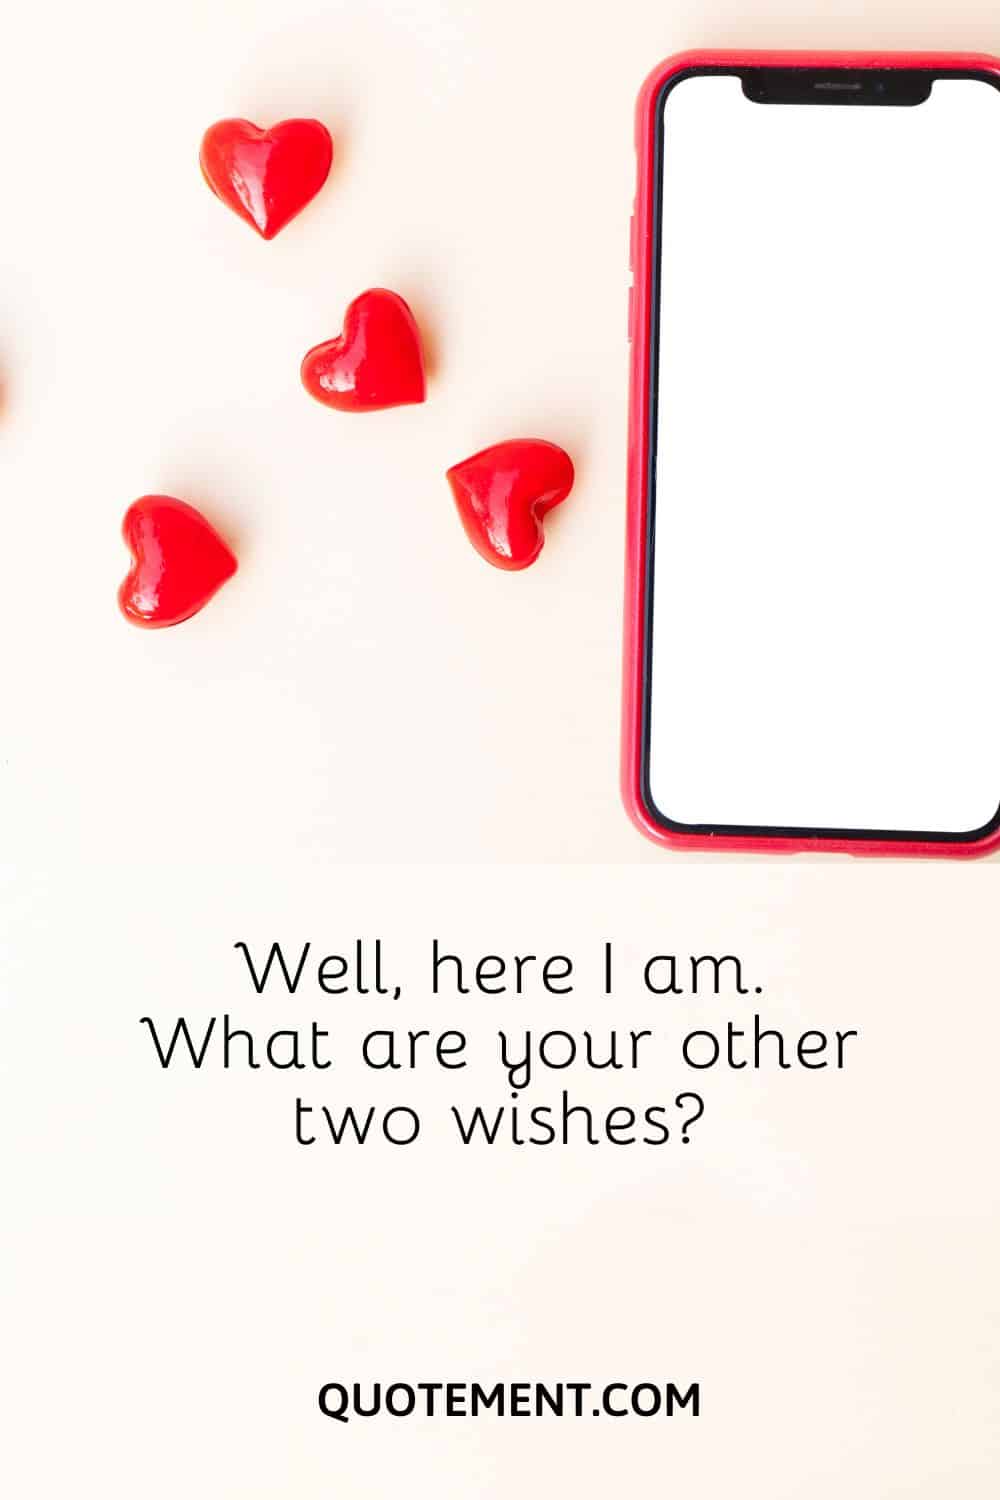 What are your other two wishes